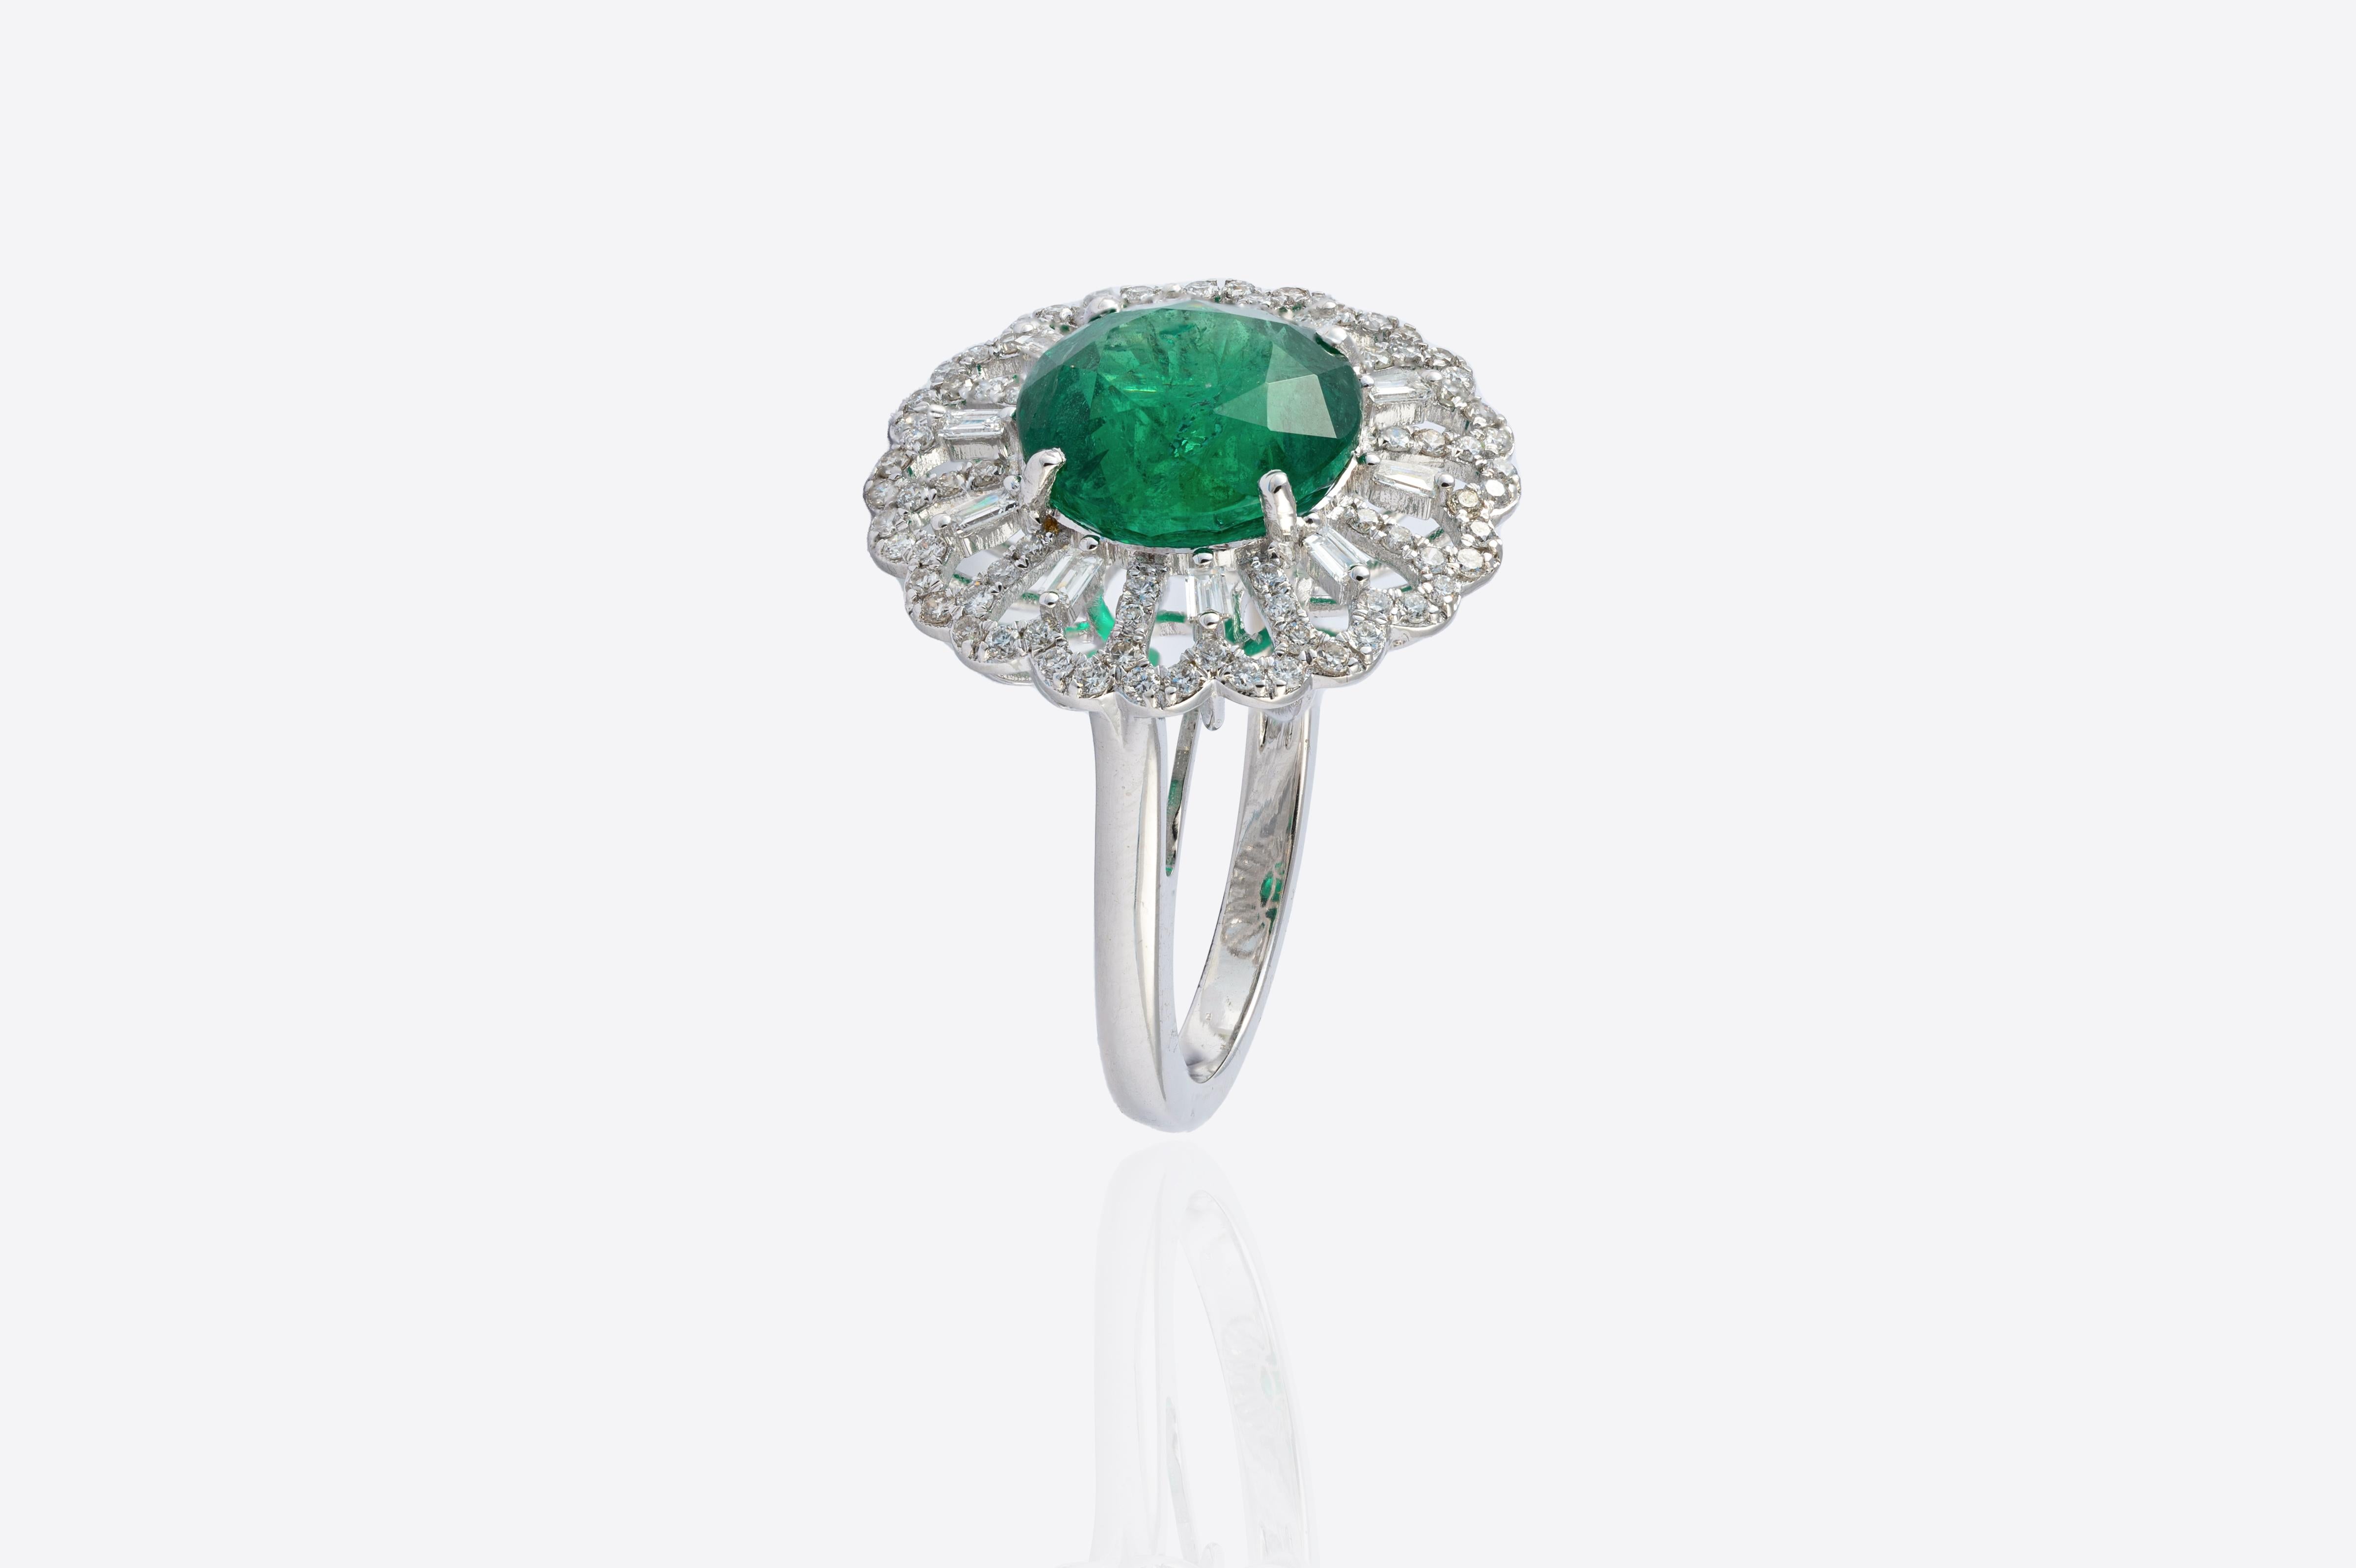 This is a beautiful natural Zambian Emerald ring for daily wear. the Emerald is of very high quality
and diamonds are very good vsi quality and G colour 
Emerald : 5.71cts 
Diamonds : 0.77cts
gold : 4.98gms 
very hard to capture the true color and